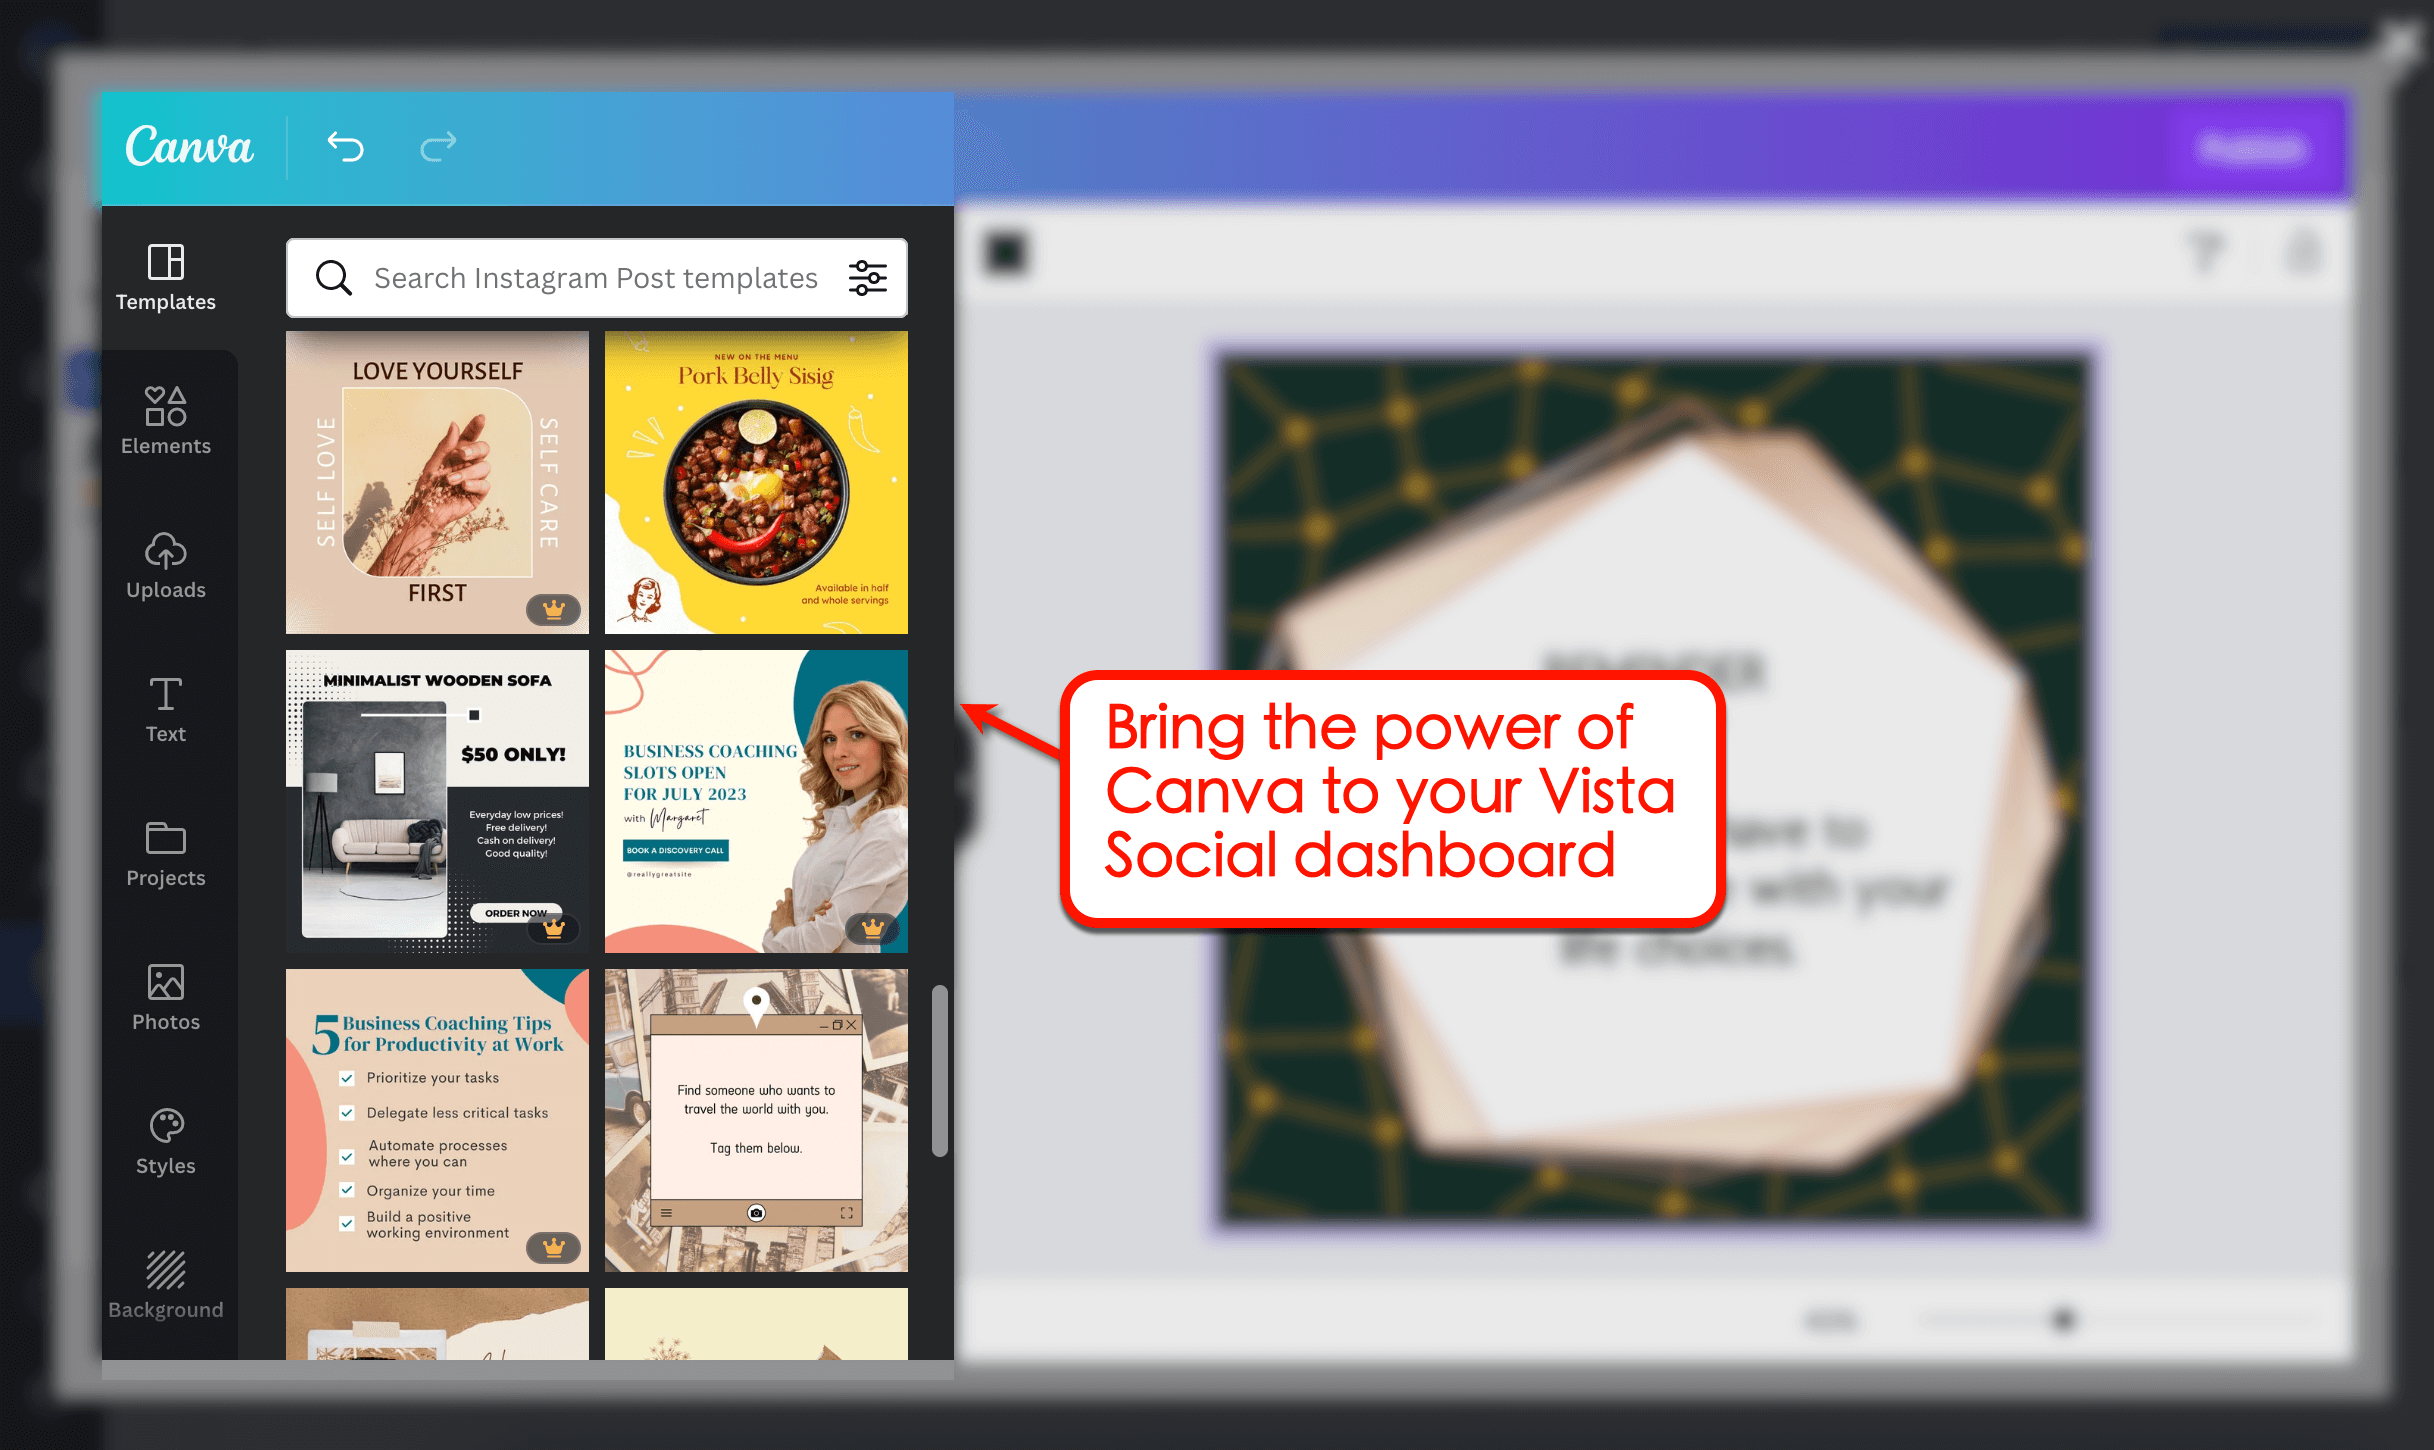 For images, the Canva integration also lets you edit photos or create new graphics